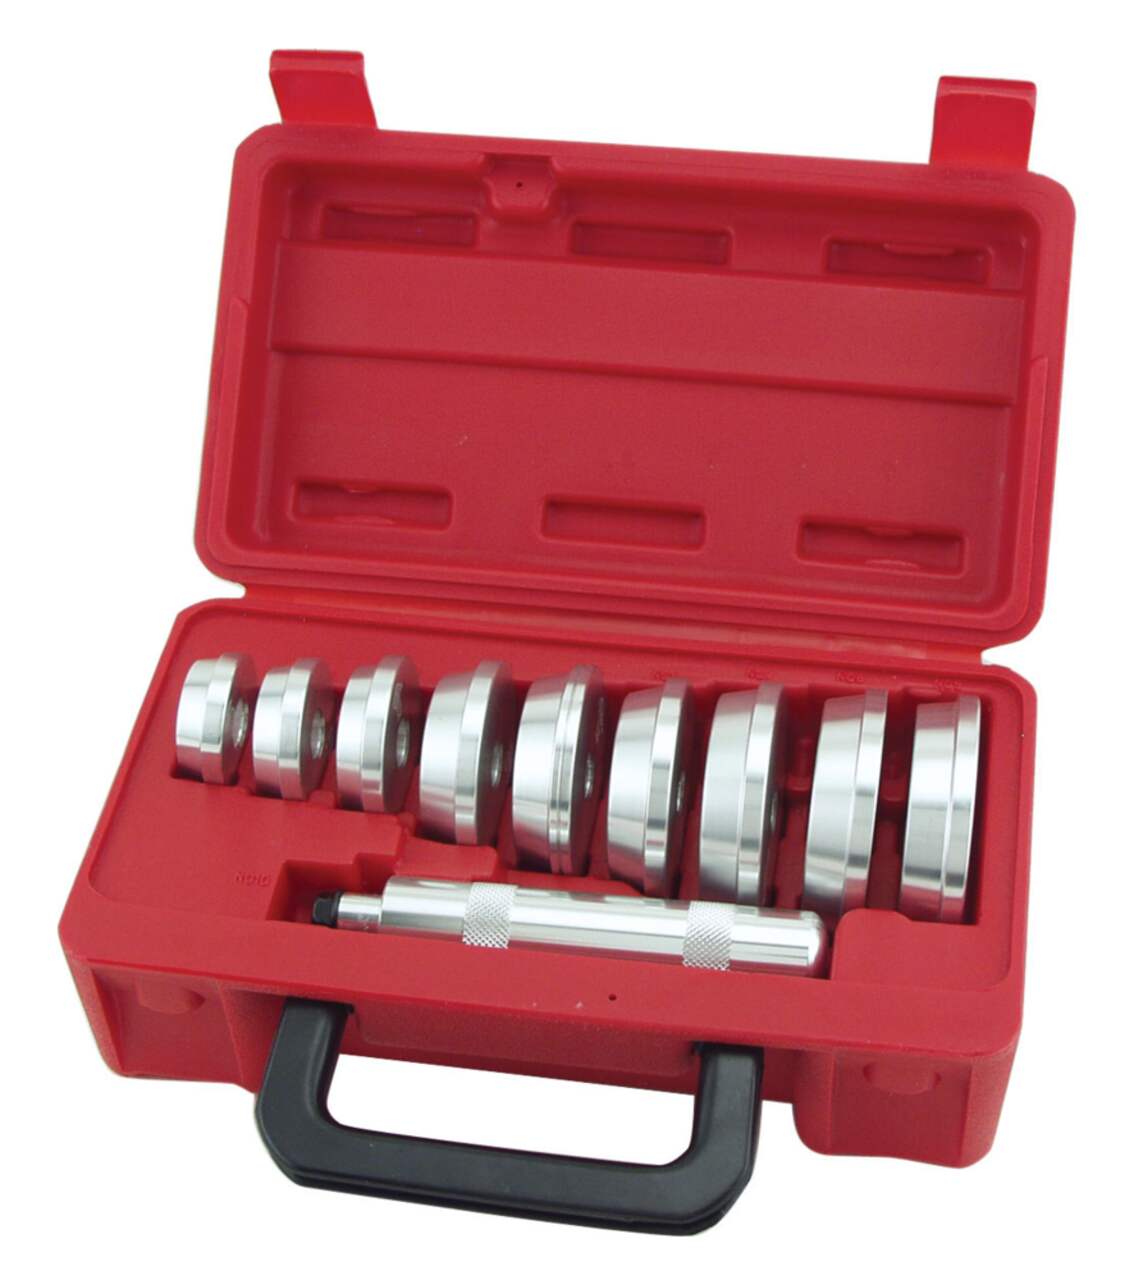 https://media-www.canadiantire.ca/product/automotive/auto-maintenance/oil-change-and-fuel-accessories/1250004/oemtools-bearing-and-race-installer-set-2263e8d8-572e-4fb7-88a1-f17645e9fc9c.png?imdensity=1&imwidth=640&impolicy=mZoom